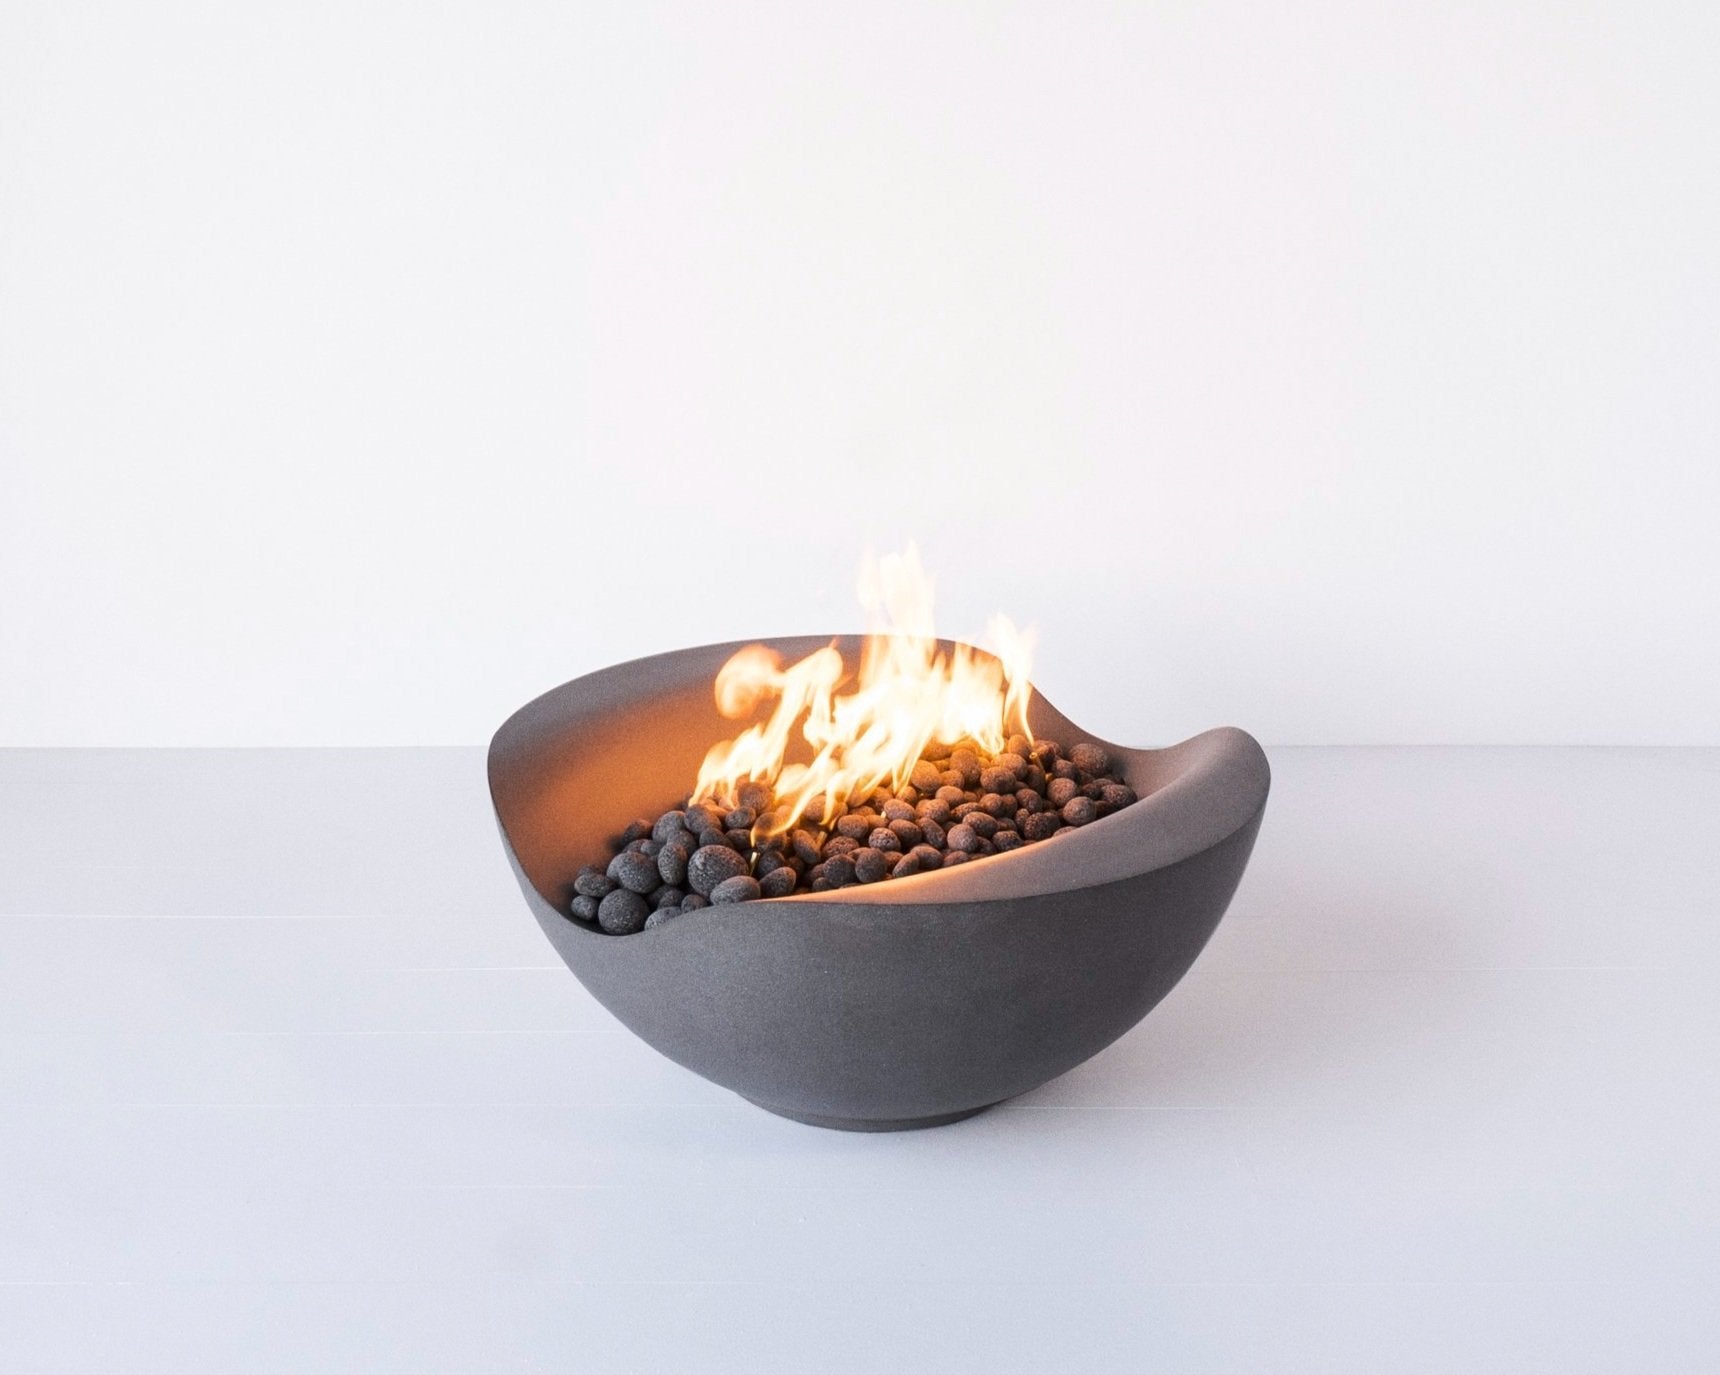 Balance - a round concrete custom made fire pit in dark gray color